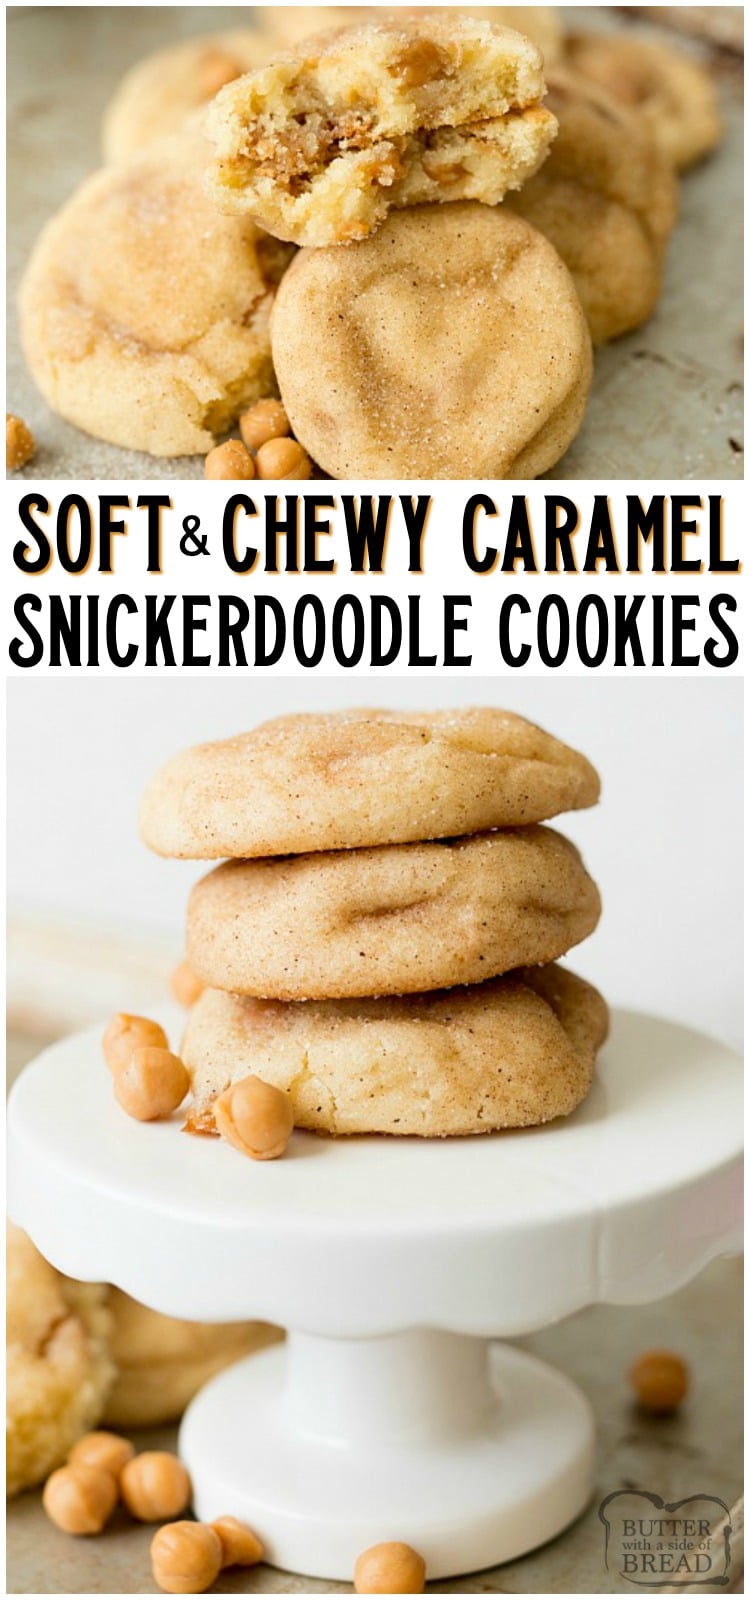 Caramel Snickerdoodle Cookie recipe is a variation on the classic snickerdoodle cookies. Pillowy soft cinnamon and sugar cookie with chunks of caramel inside! These cookies are the best snickerdoodle recipe and they scream AUTUMN!